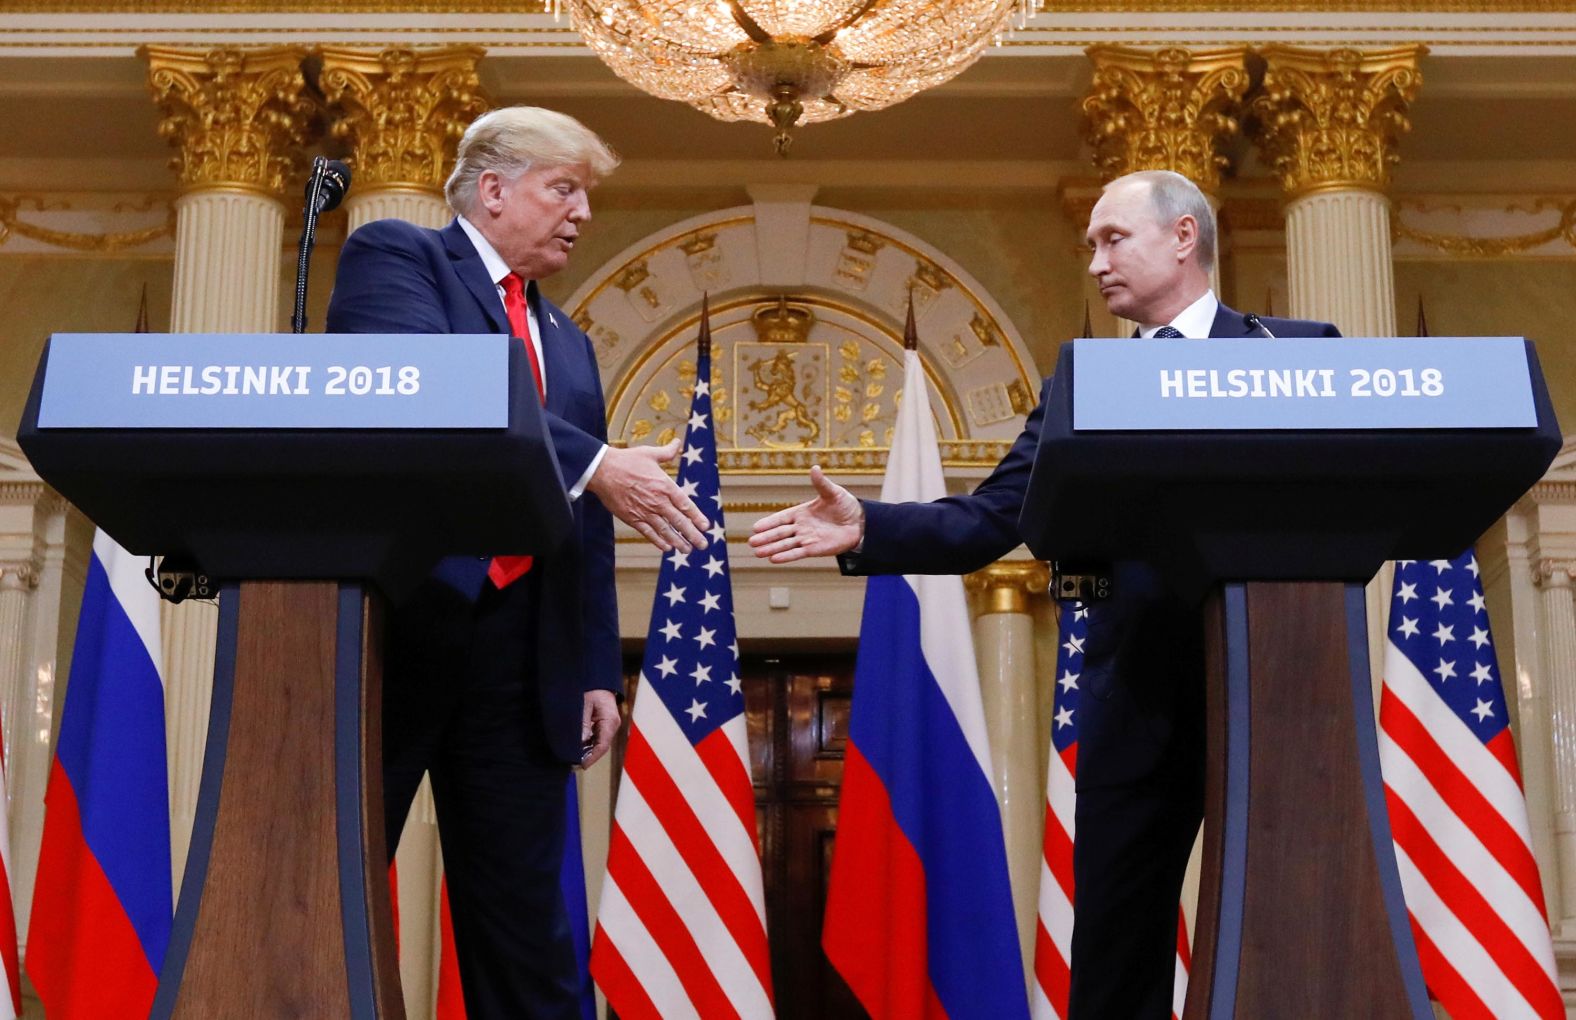 Trump shakes hands with Russian President Vladimir Putin at the end of <a href="index.php?page=&url=https%3A%2F%2Fwww.cnn.com%2Finteractive%2F2018%2F07%2Fpolitics%2Ftrump-putin-summit-cnnphotos%2F" target="_blank">their summit</a> in Helsinki, Finland, in July 2018. Afterward, Trump said he believed it had significantly improved relations between the two countries. "Our relationship has never been worse than it is now. However, that changed as of about four hours ago. I really believe that," Trump said during a joint news conference. The Putin meeting was the last part of Trump's <a href="index.php?page=&url=https%3A%2F%2Fwww.cnn.com%2Finteractive%2F2018%2F07%2Fpolitics%2Ftrump-europe-trip-cnnphotos%2F" target="_blank">weeklong trip to Europe.</a>